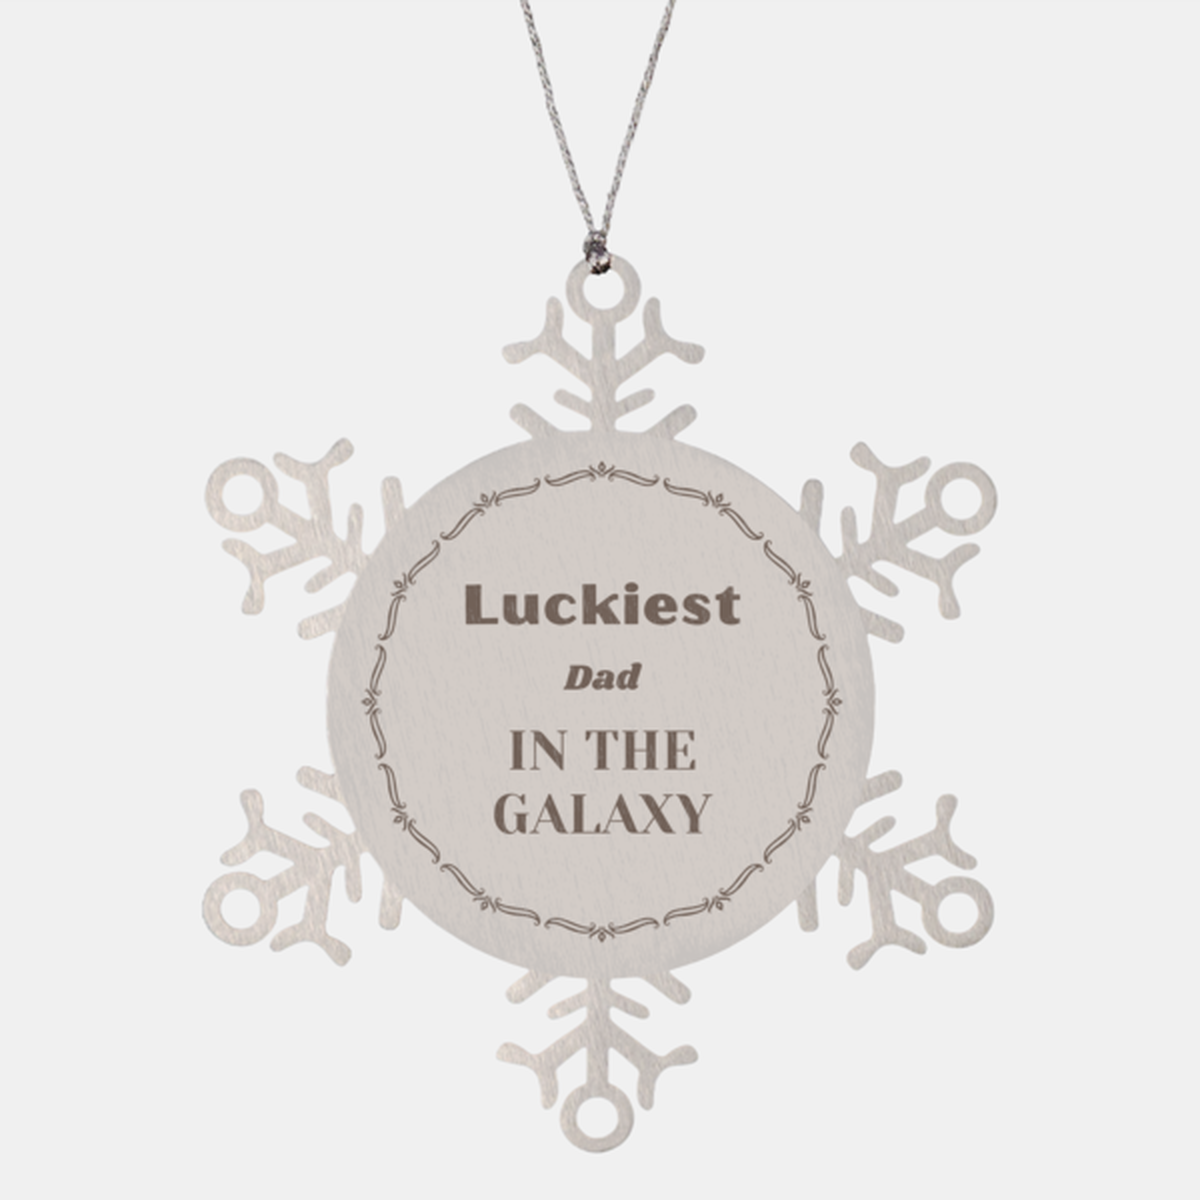 Luckiest Dad in the Galaxy, To My Dad Ornament Gifts, Christmas Dad Snowflake Ornament Gifts, X-mas Decorations Unique Gifts For Dad Men Women